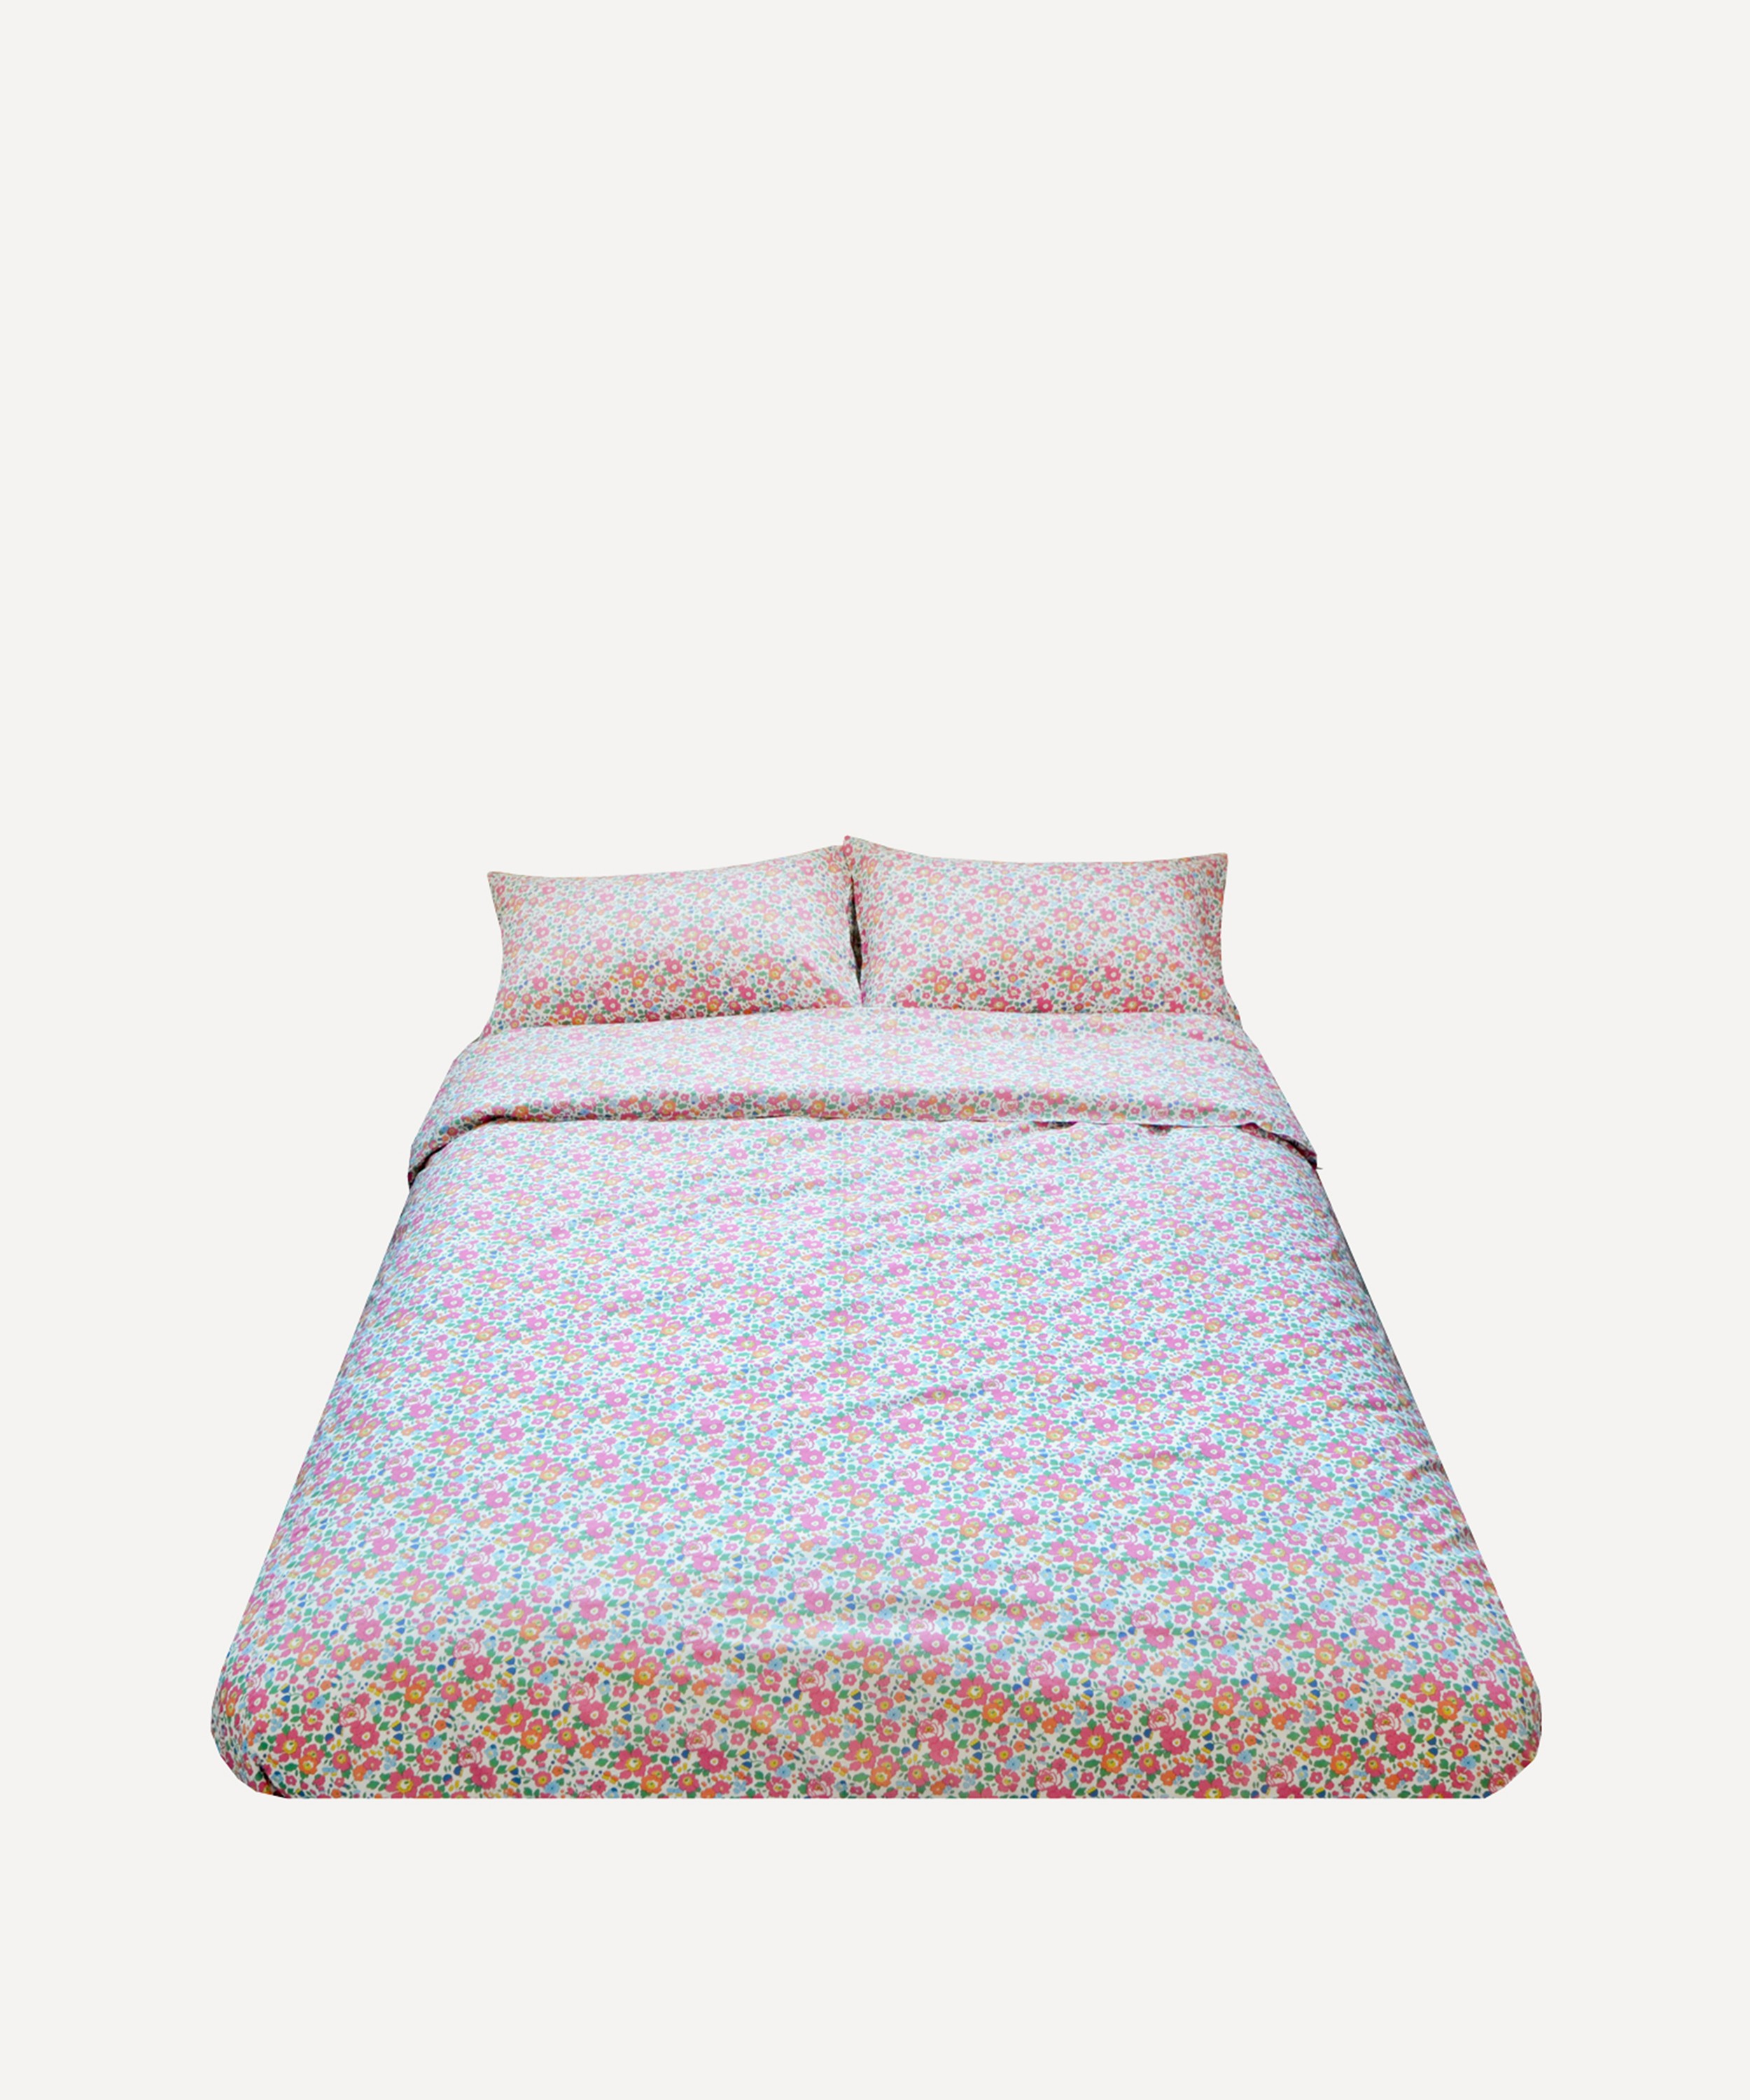 Coco & Wolf - Betsy Deep Pink King Duvet Cover Set image number 0